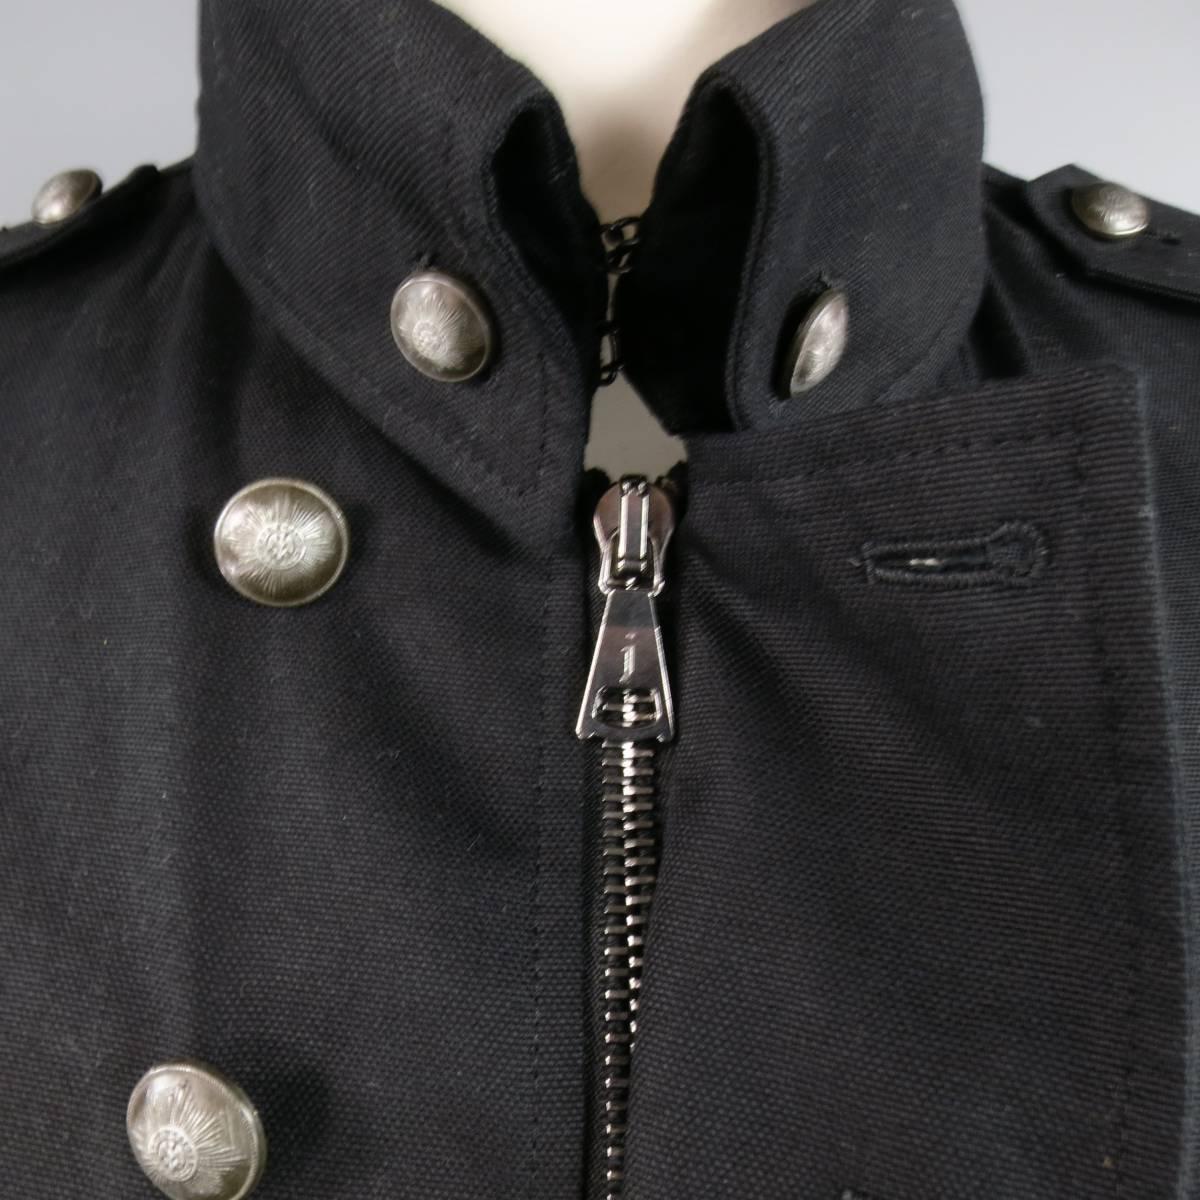 Modern miltary jacket by JOHN VARVATOS in black cotton canvas featuring a pointed collar with buttons, shoulder epaulets, double zip pockets, tab cuffs, and double breasted closure with brass buttons. Made in Italy.
Retails at $1195.00.
 
New with